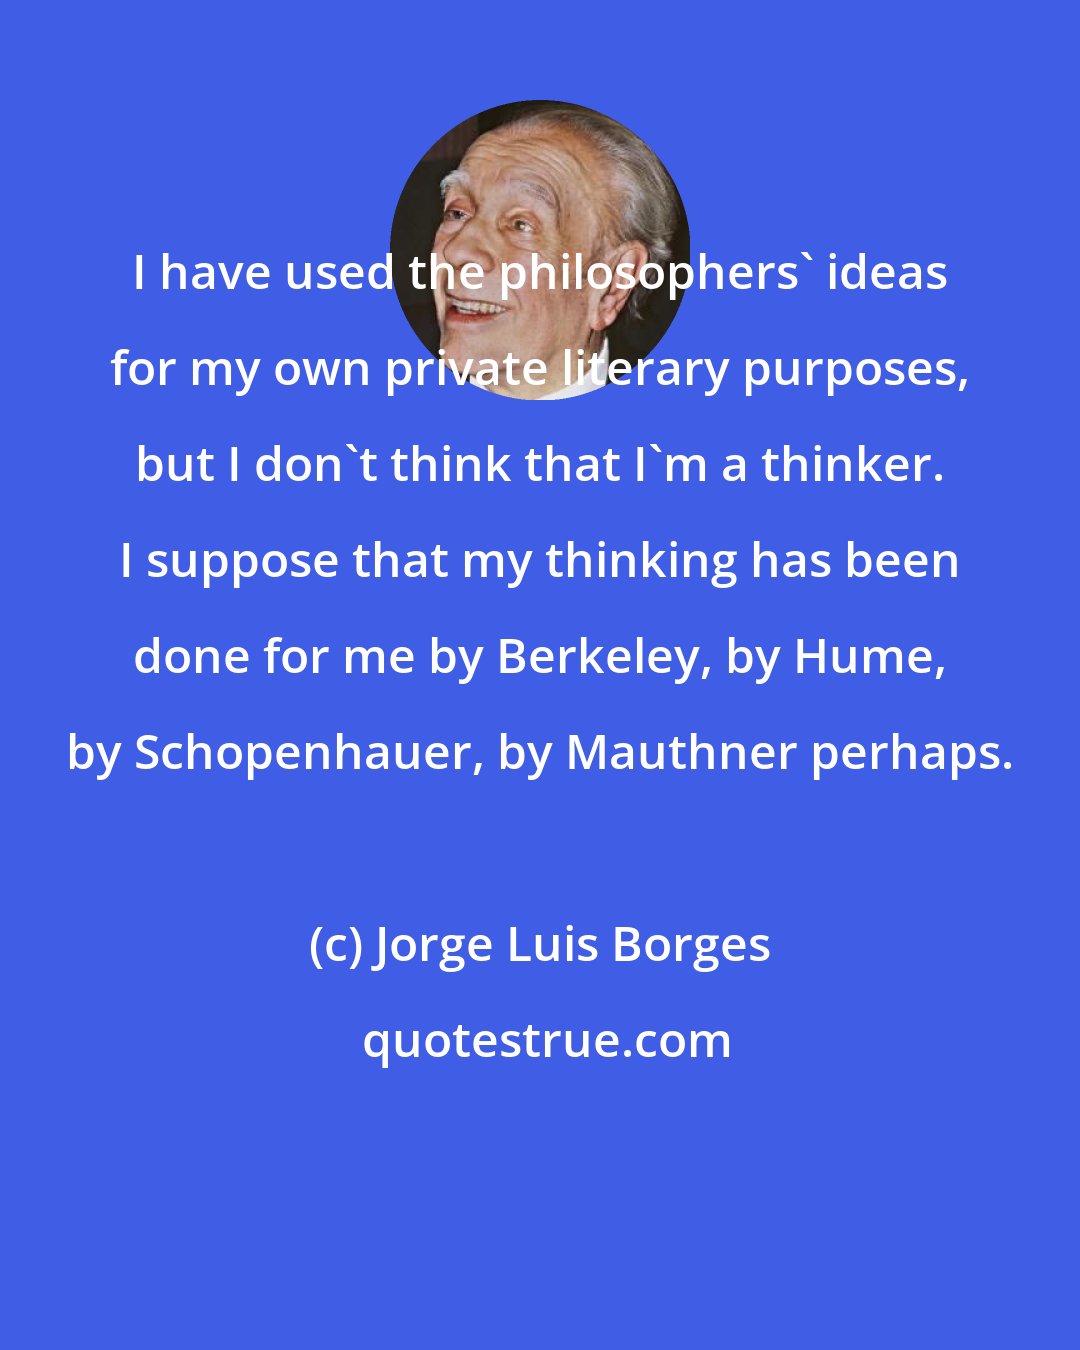 Jorge Luis Borges: I have used the philosophers' ideas for my own private literary purposes, but I don't think that I'm a thinker. I suppose that my thinking has been done for me by Berkeley, by Hume, by Schopenhauer, by Mauthner perhaps.